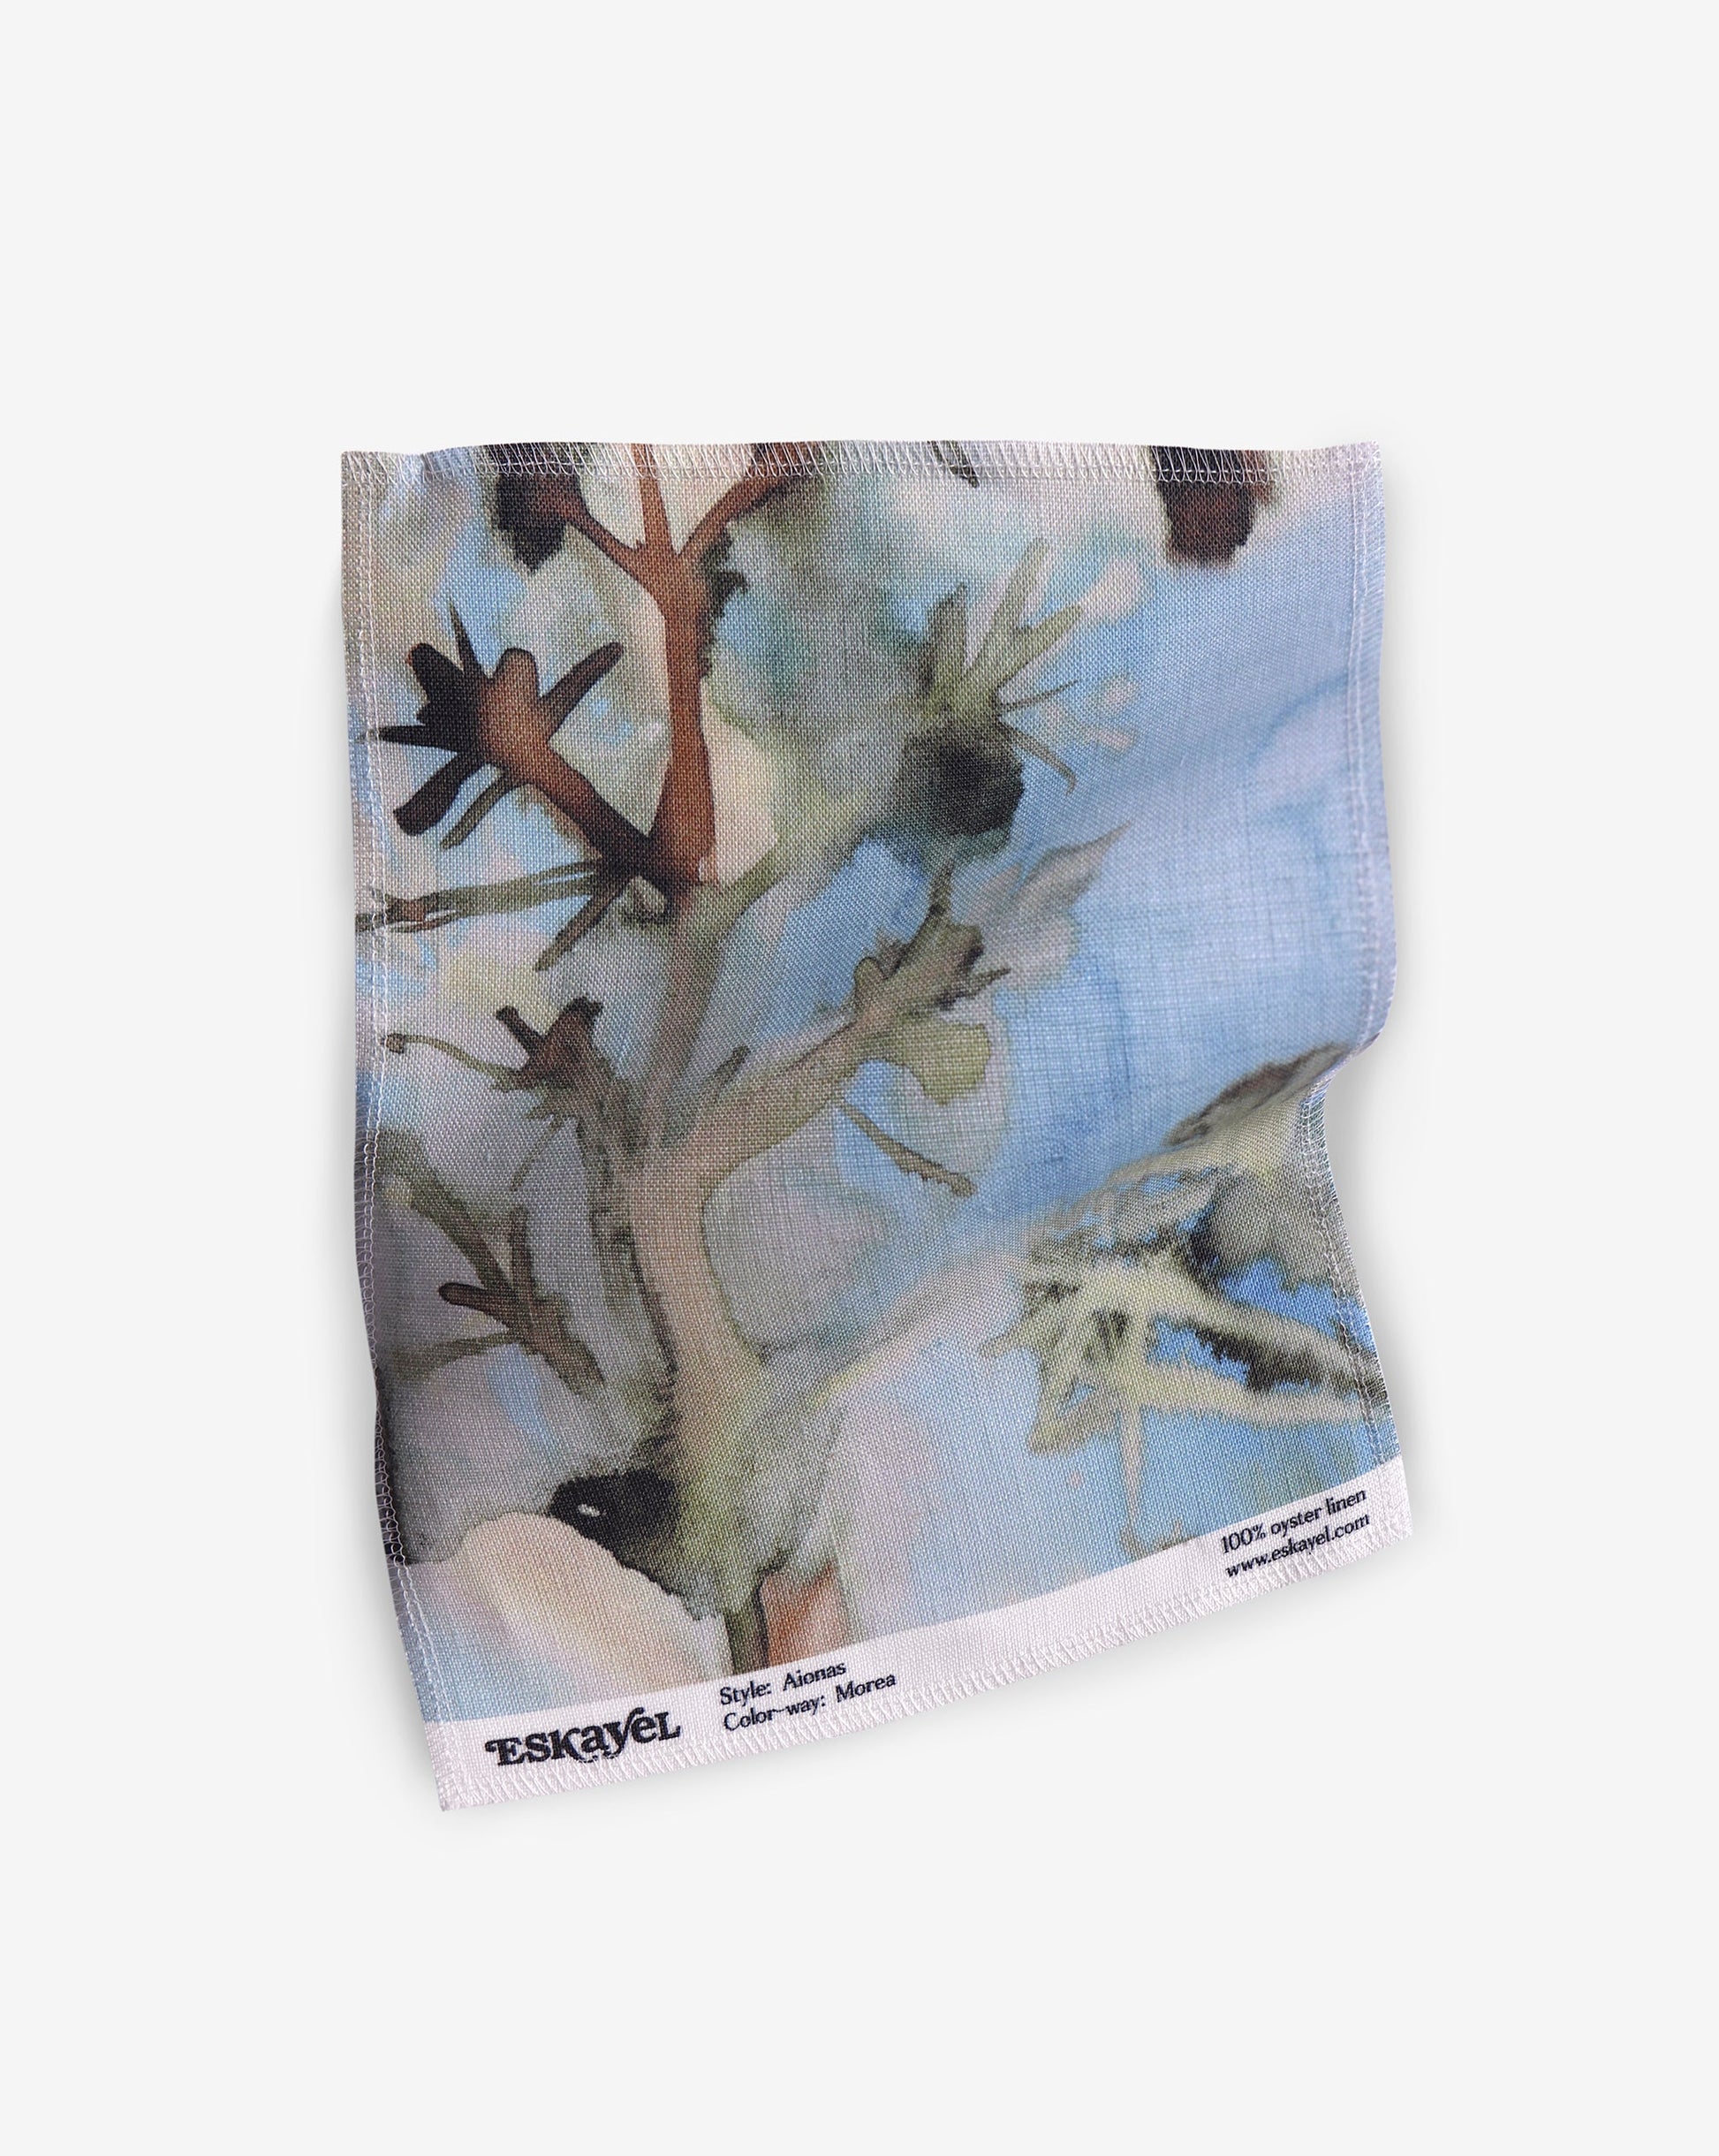 A Aionas Fabric Sample||Morea handkerchief with an image of a tree.